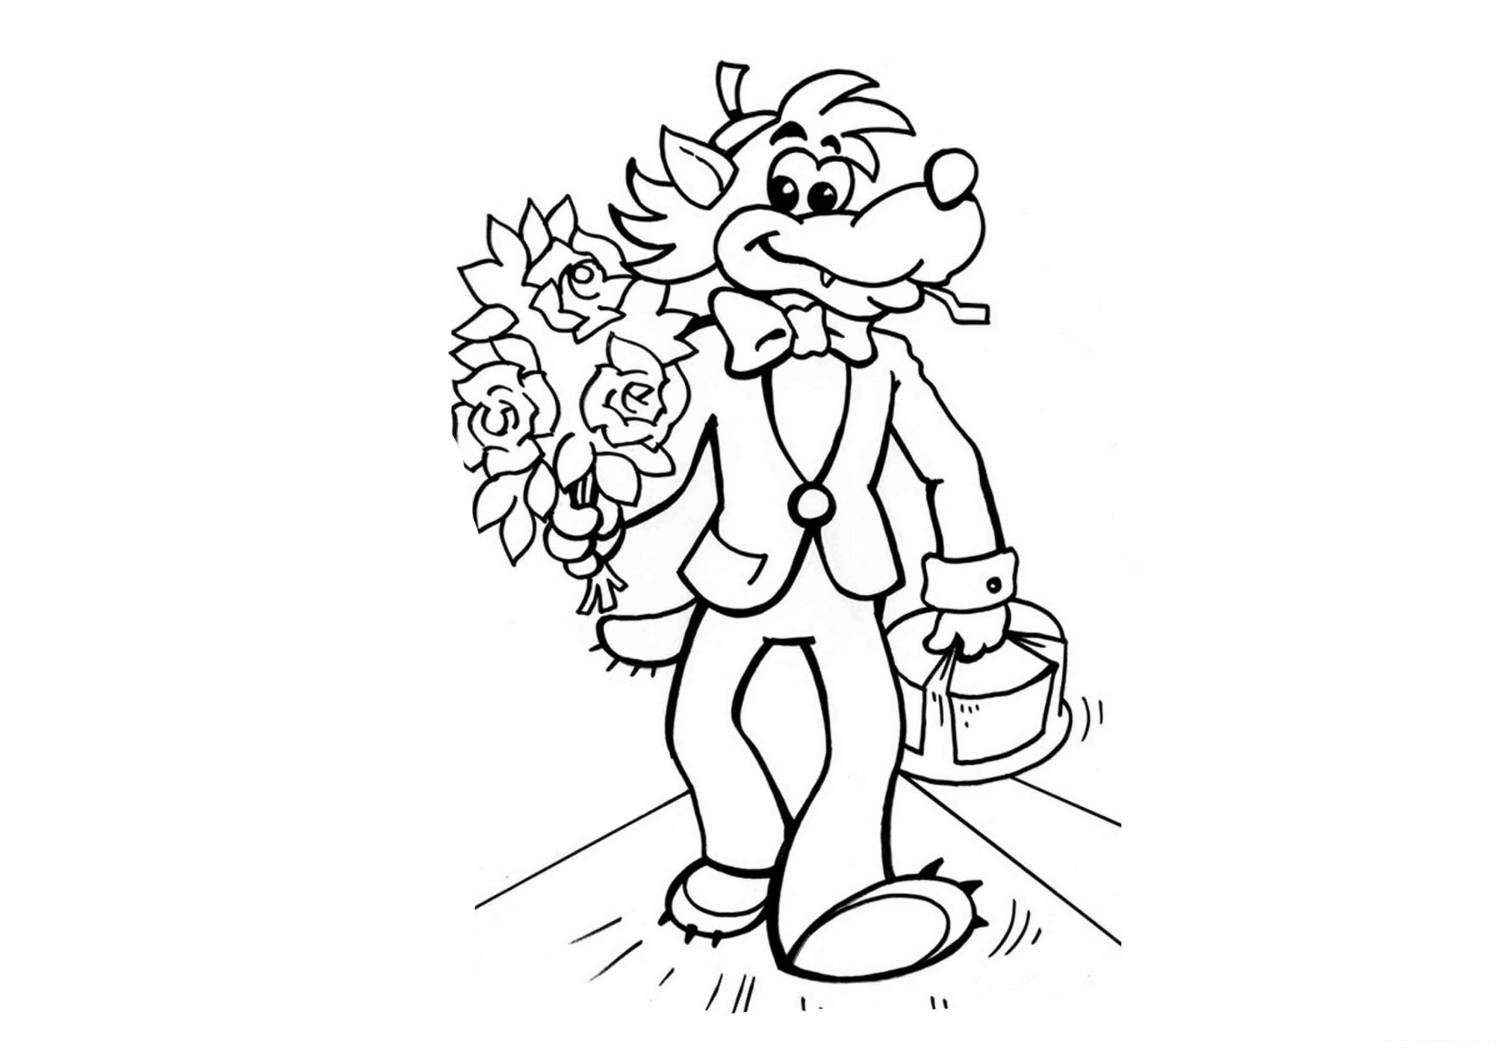 Wolf with a bouquet of flowers